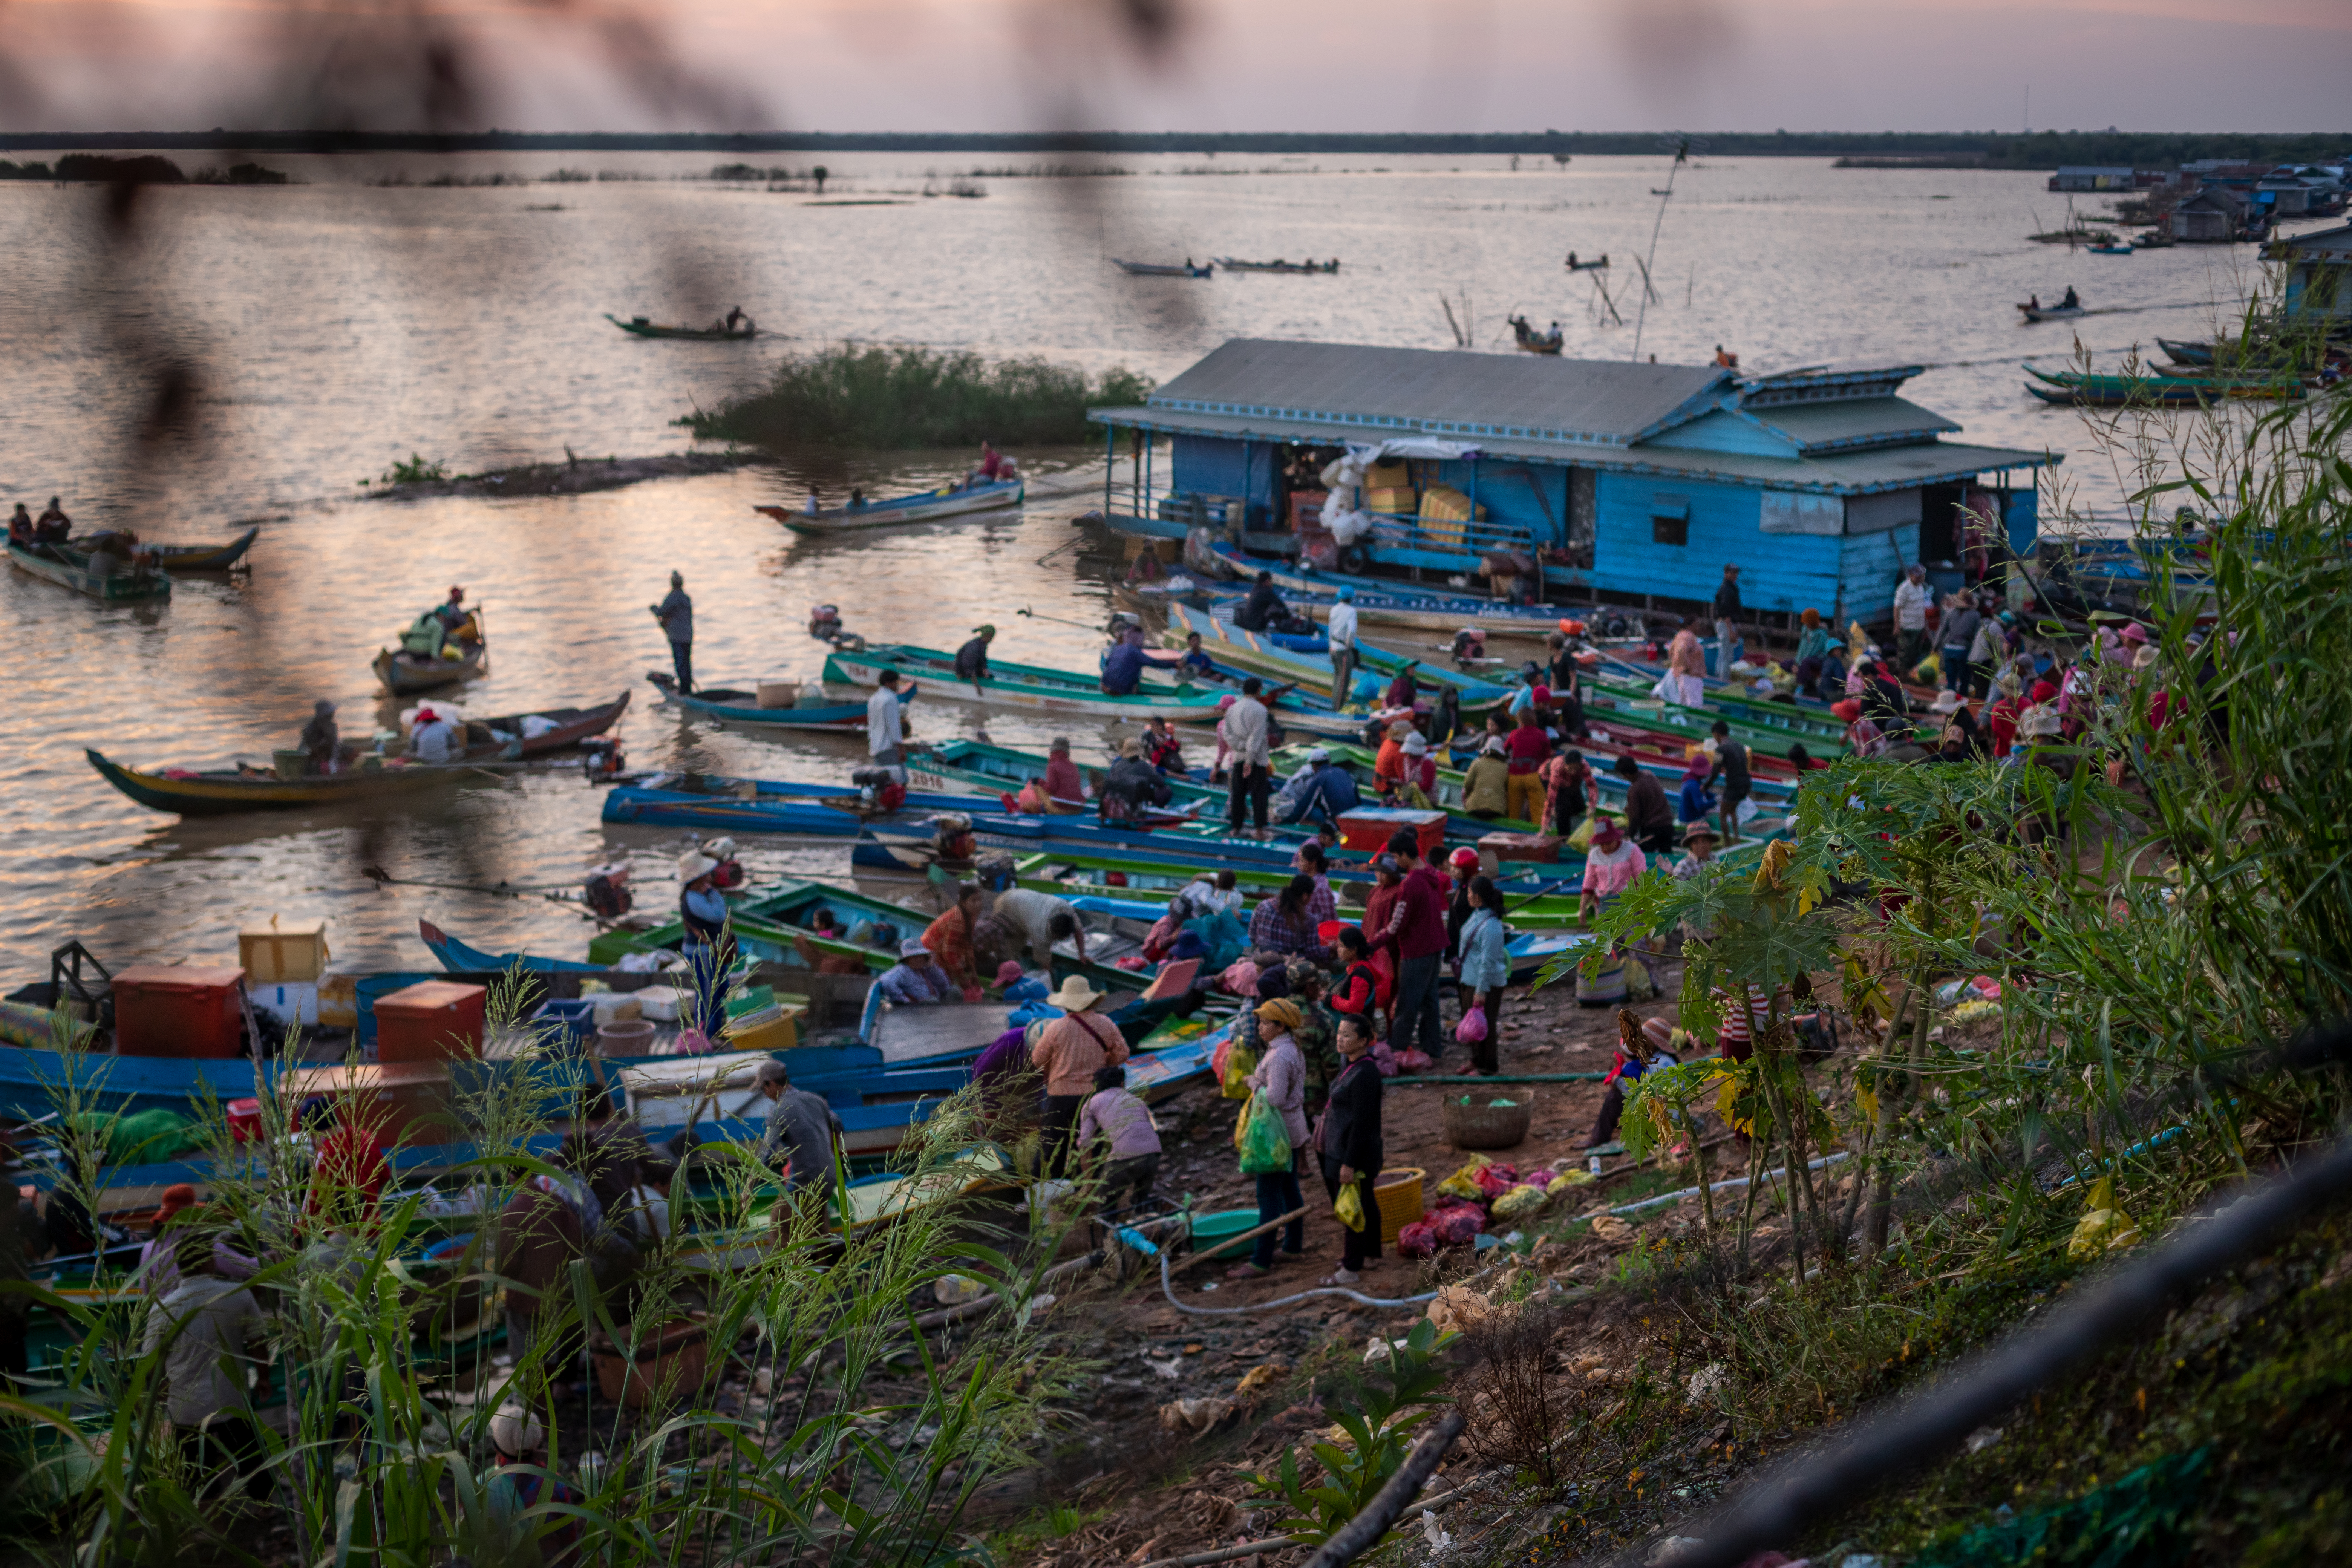 Vendors gather at the edge of the Tonle Sap lake in Siem Reap's Chong Kneas village in January 2017.